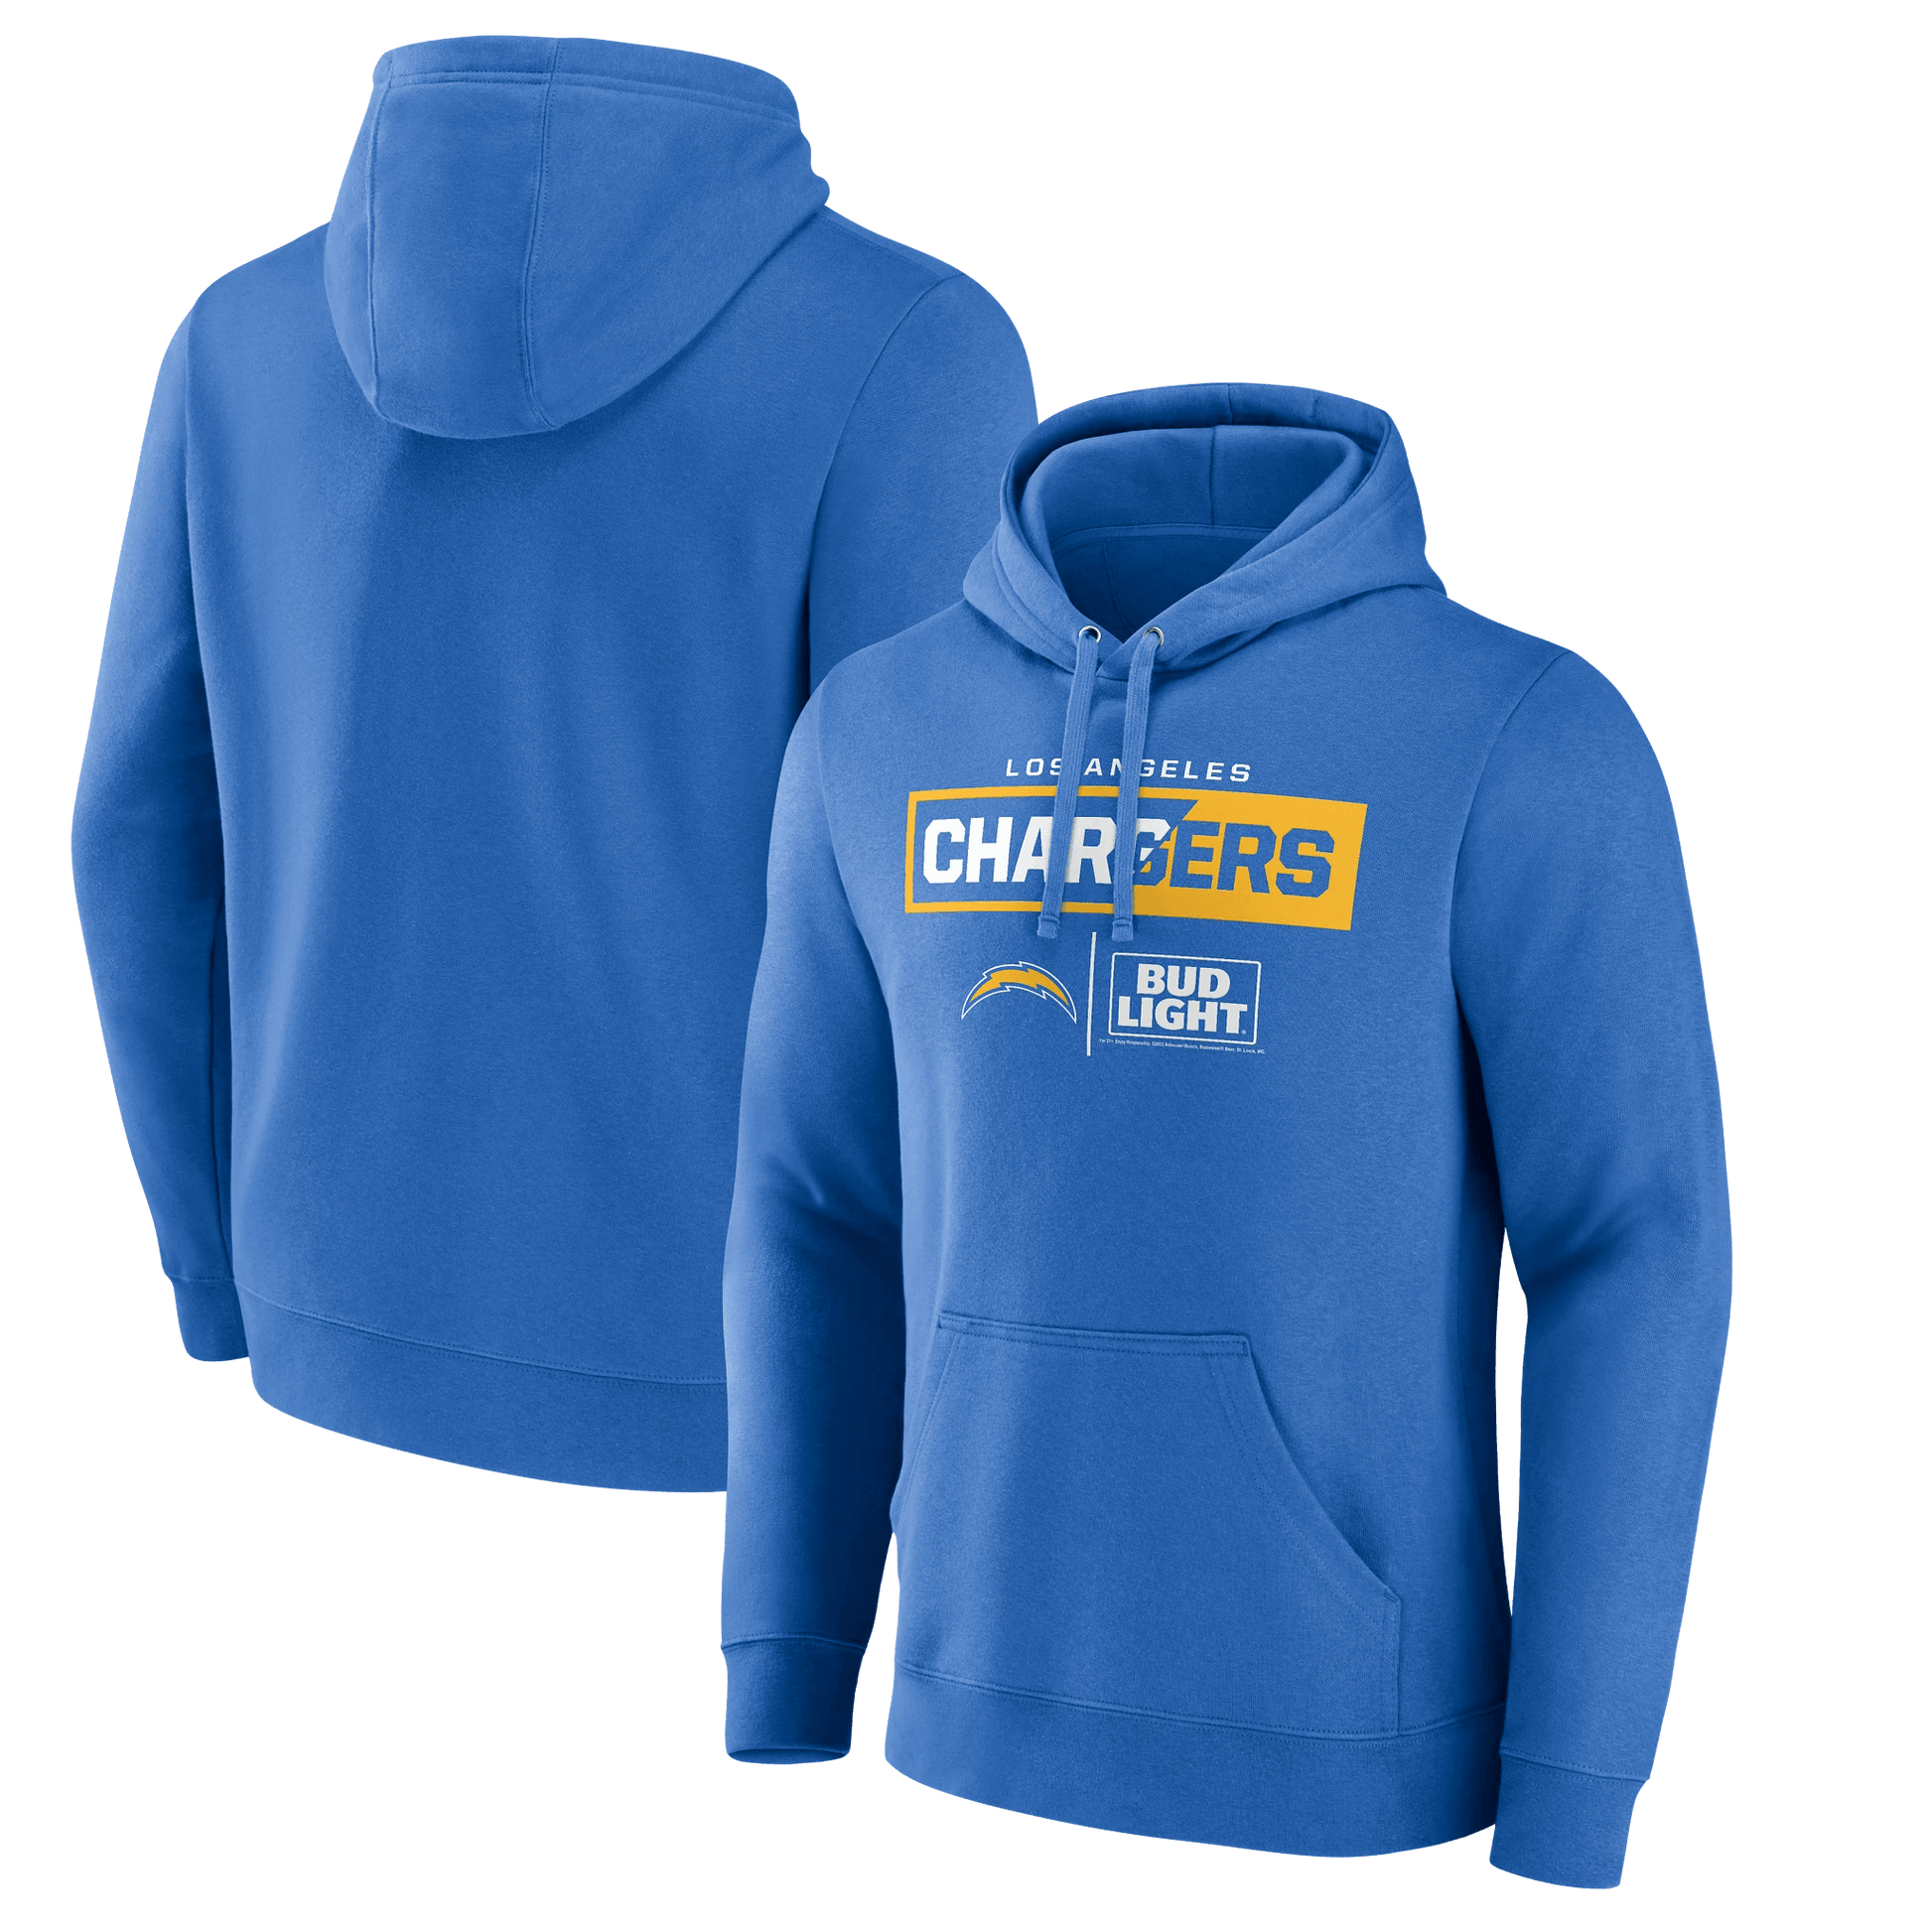 BUD LIGHT CHARGERS HOODIE BLUE